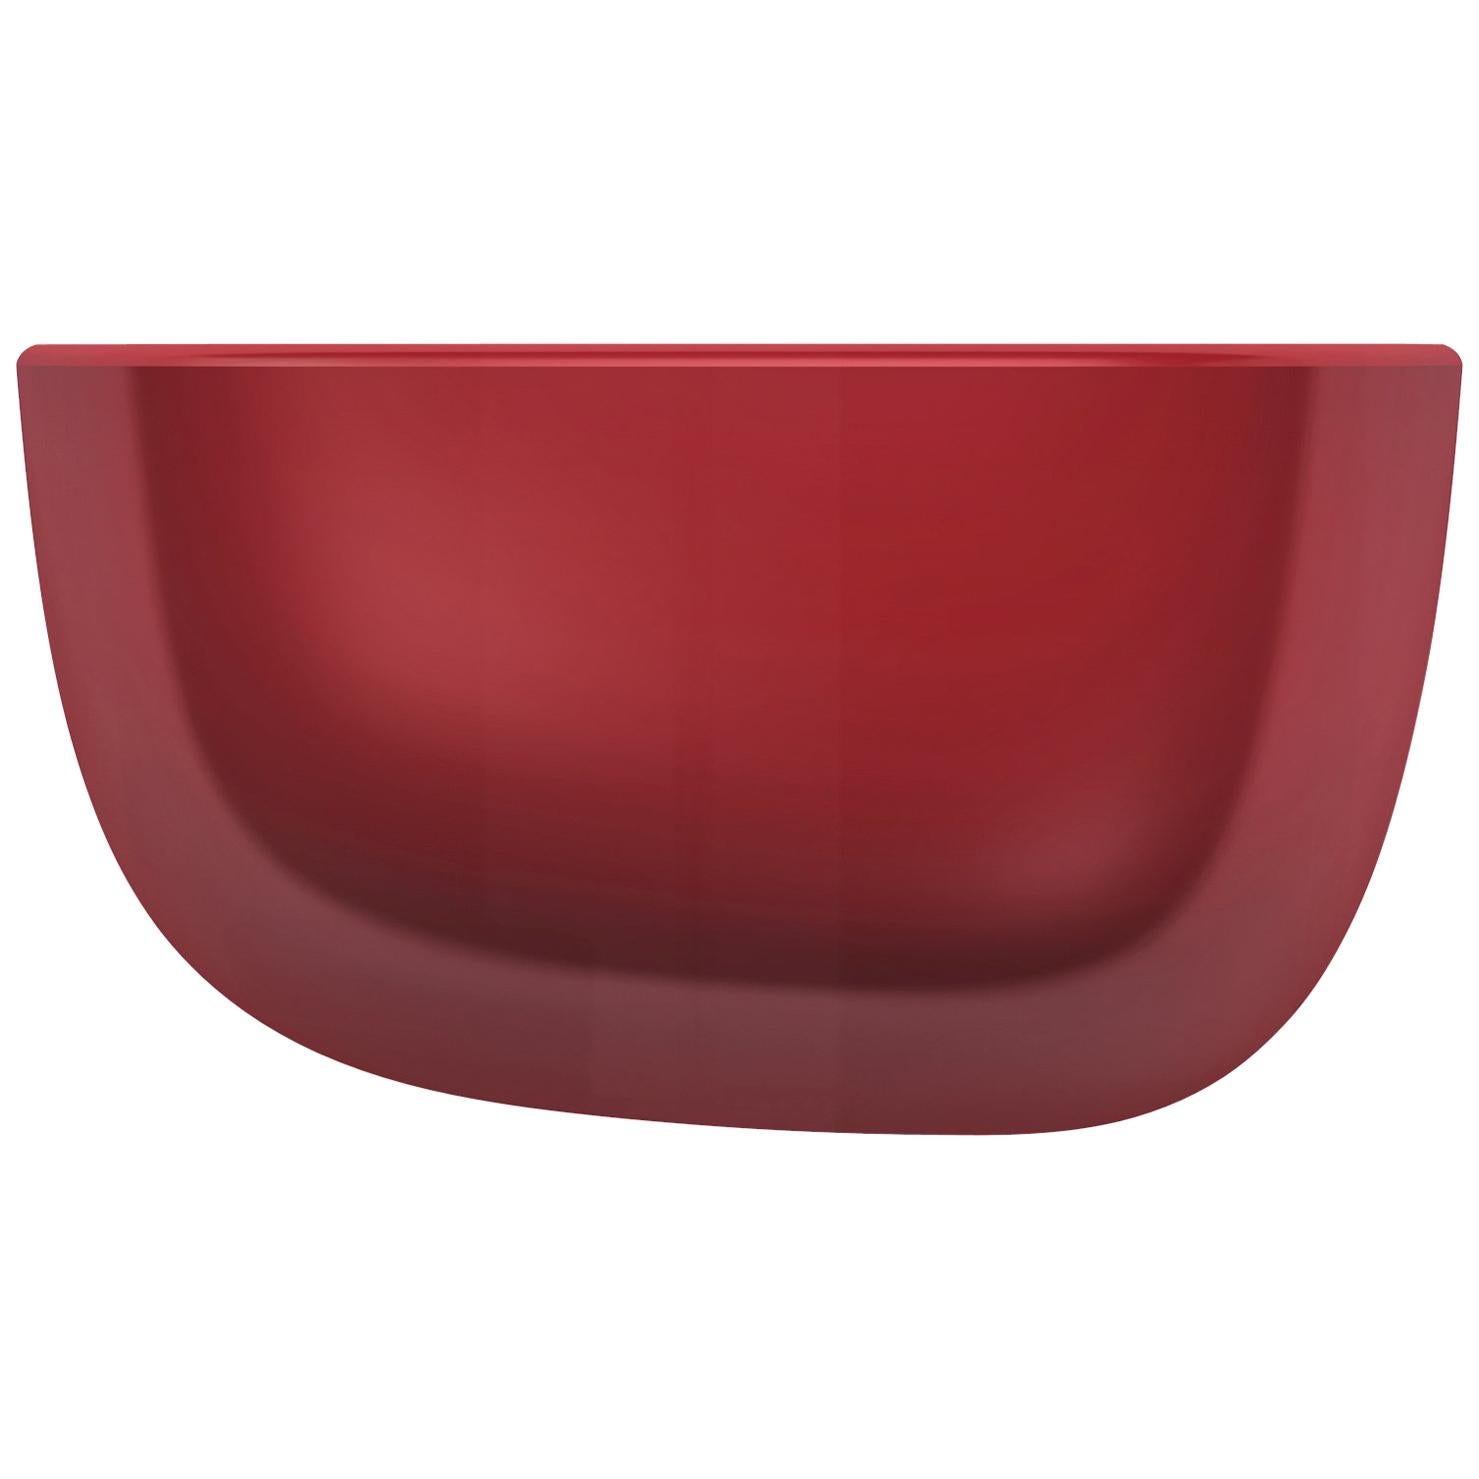 Vitra Small Corniches in Japanese Red by Ronan & Erwan Bouroullec im Angebot